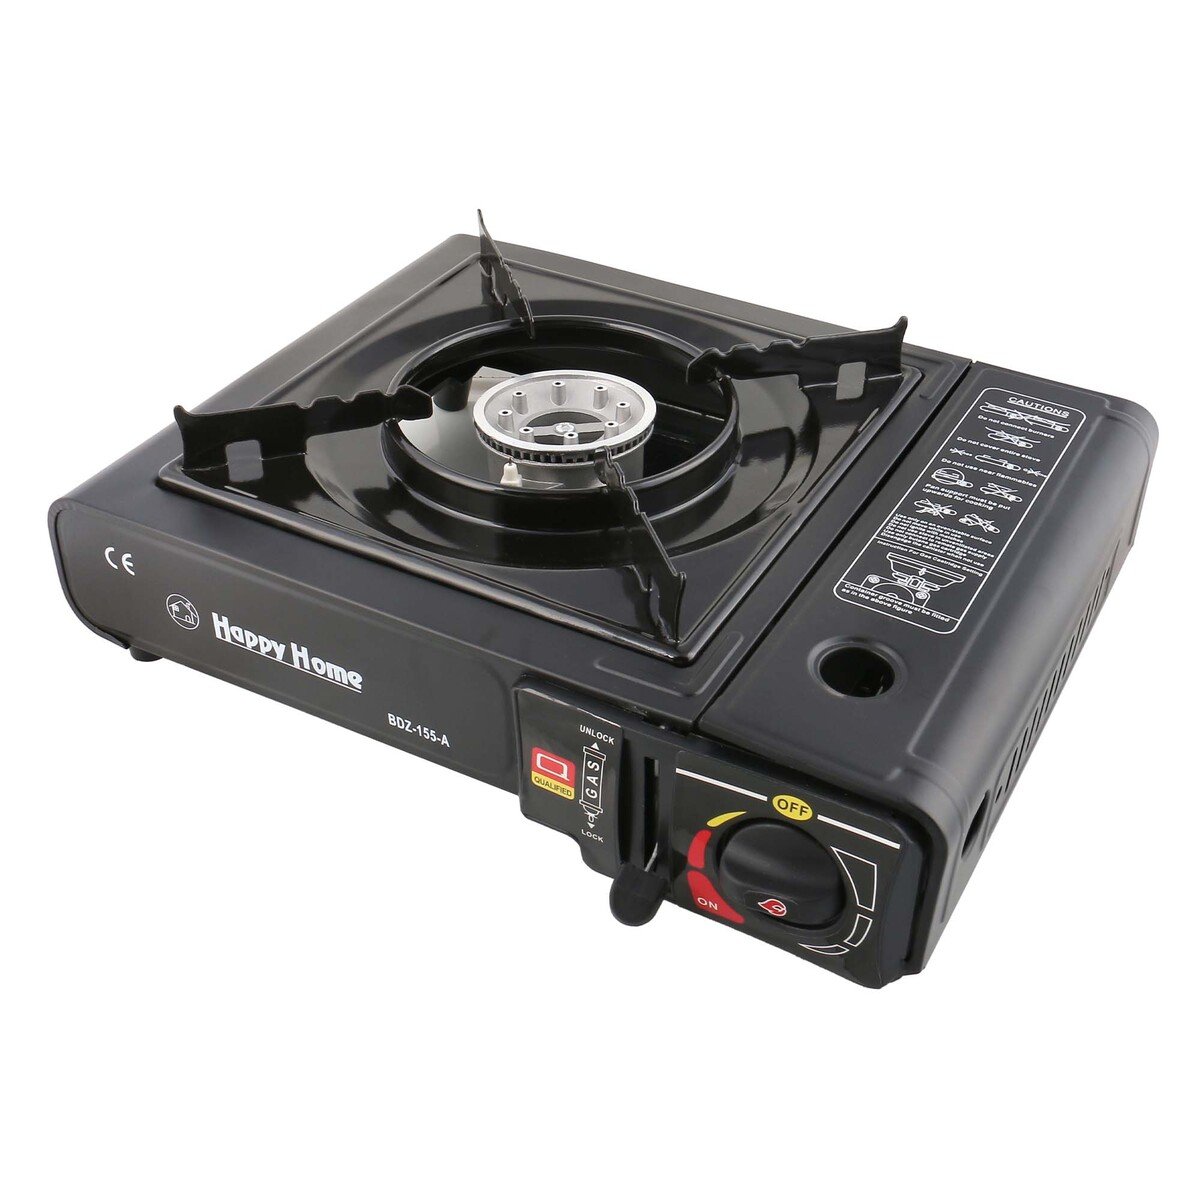 Campmate Dual Portable Gas Stove, Black, CM-7000 Online at Best Price ...